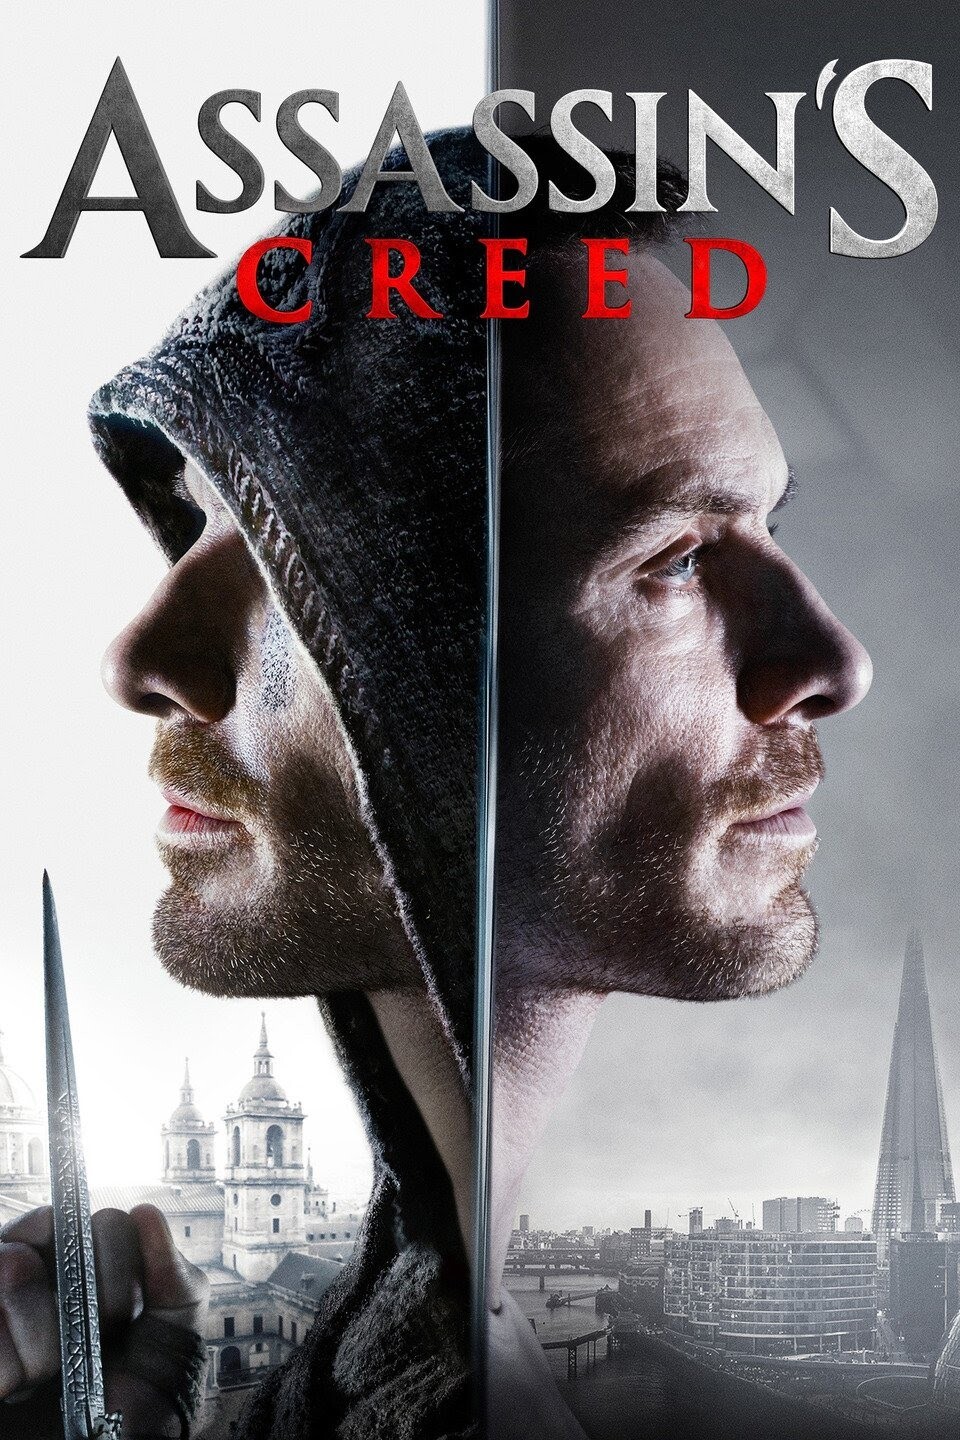 Fassbender's Creed Assassins video game